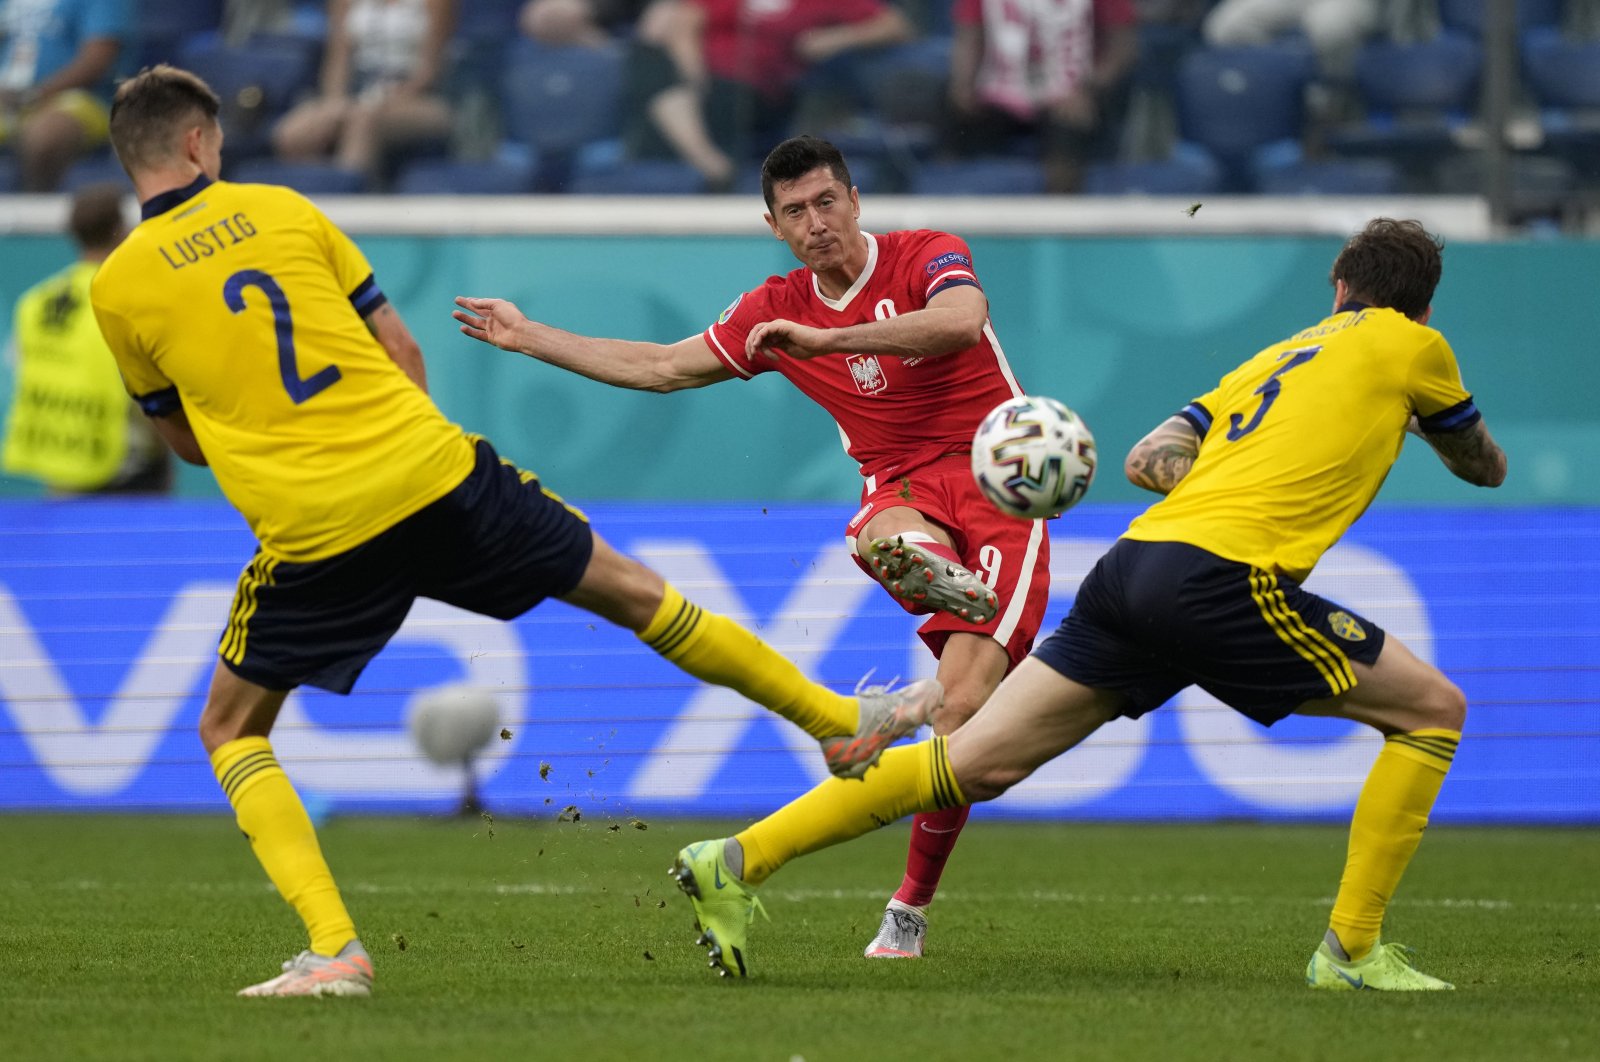 Poland's Robert Lewandowski (C), shoots to score past Sweden's Victor Lindeloef and Sweden's Mikael Lustig during the Euro 2020 football championship Group B match between Sweden and Poland at Saint Petersburg stadium in St. Petersburg, Russia, Wednesday, June 23, 2021. (AP Photo)